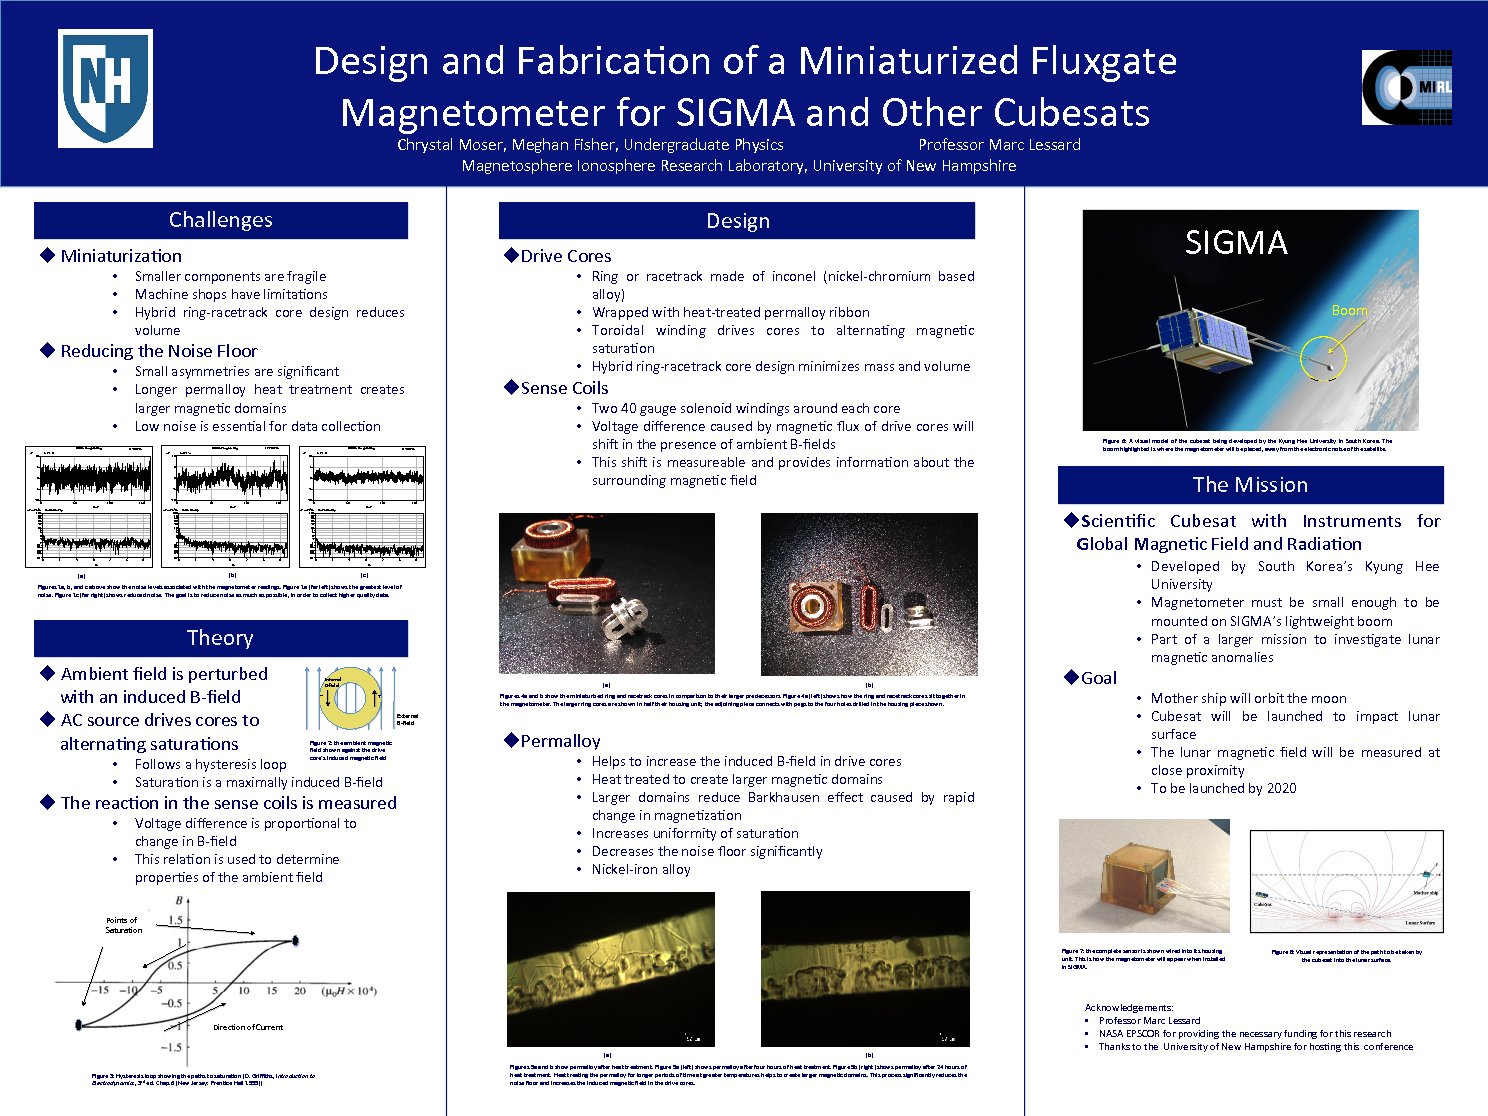 Design And Fabrication Of A Miniaturized Fluxgate Magnetometer For Sigma And Other Cubesats by mkl54